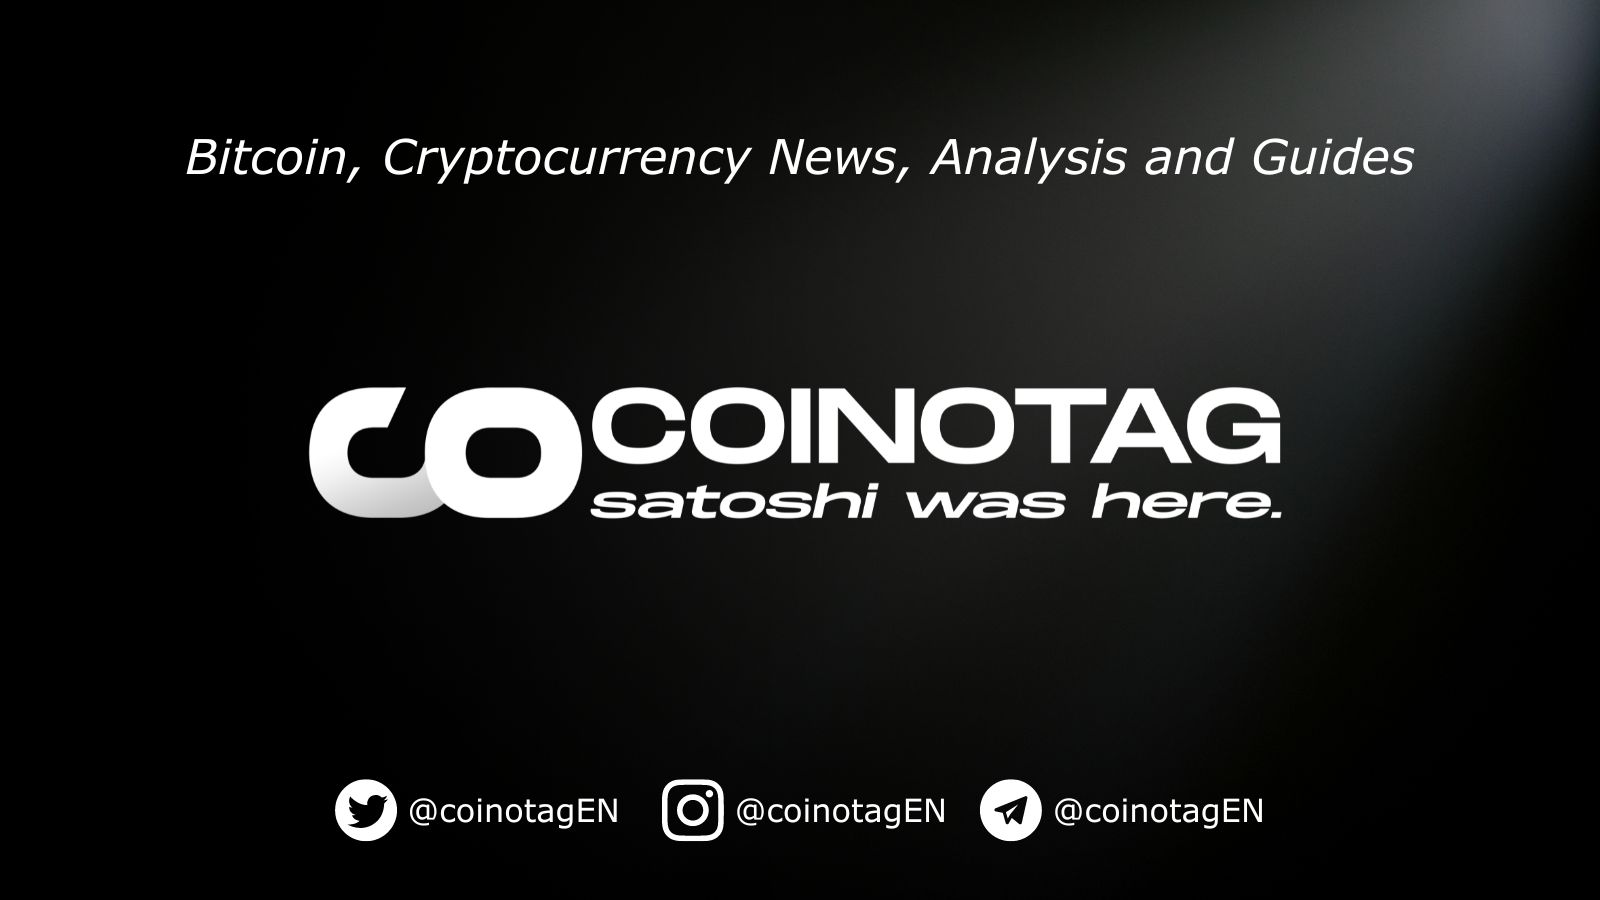 Bitcoin’s price has been under significant selling pressure due to several key factors. Not only government holdings but also large Bitcoin whales have contributed to the recent selloff. The combined selloff has adversely affected Bitcoin’s market value. Discover the driving forces behind the recent Bitcoin downturn, from government actions to whale activities. Stay informed with